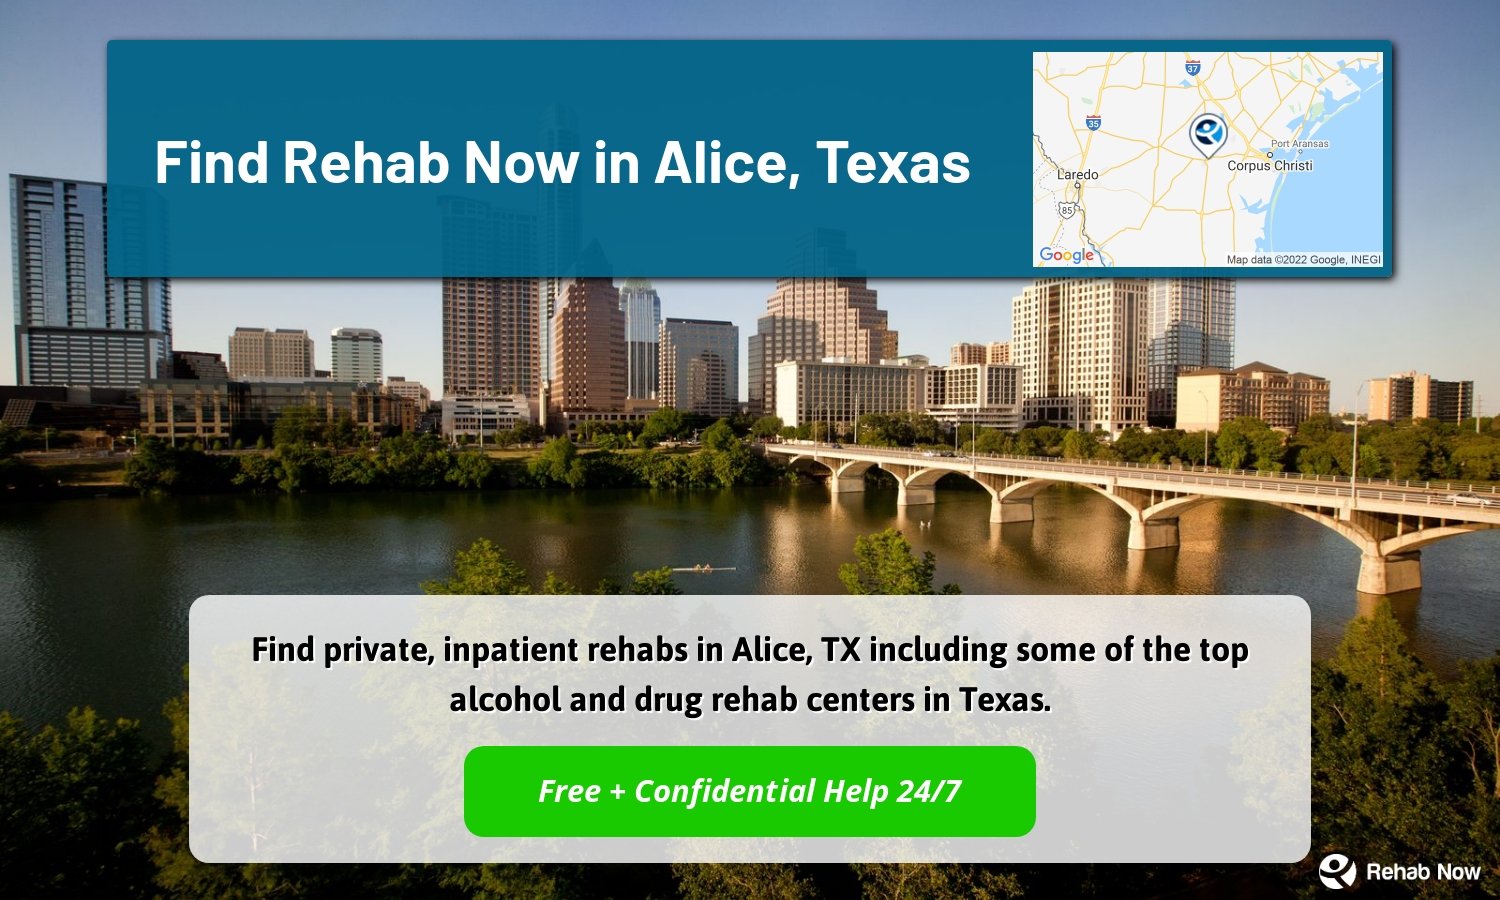 Find private, inpatient rehabs in Alice, TX including some of the top alcohol and drug rehab centers in Texas.